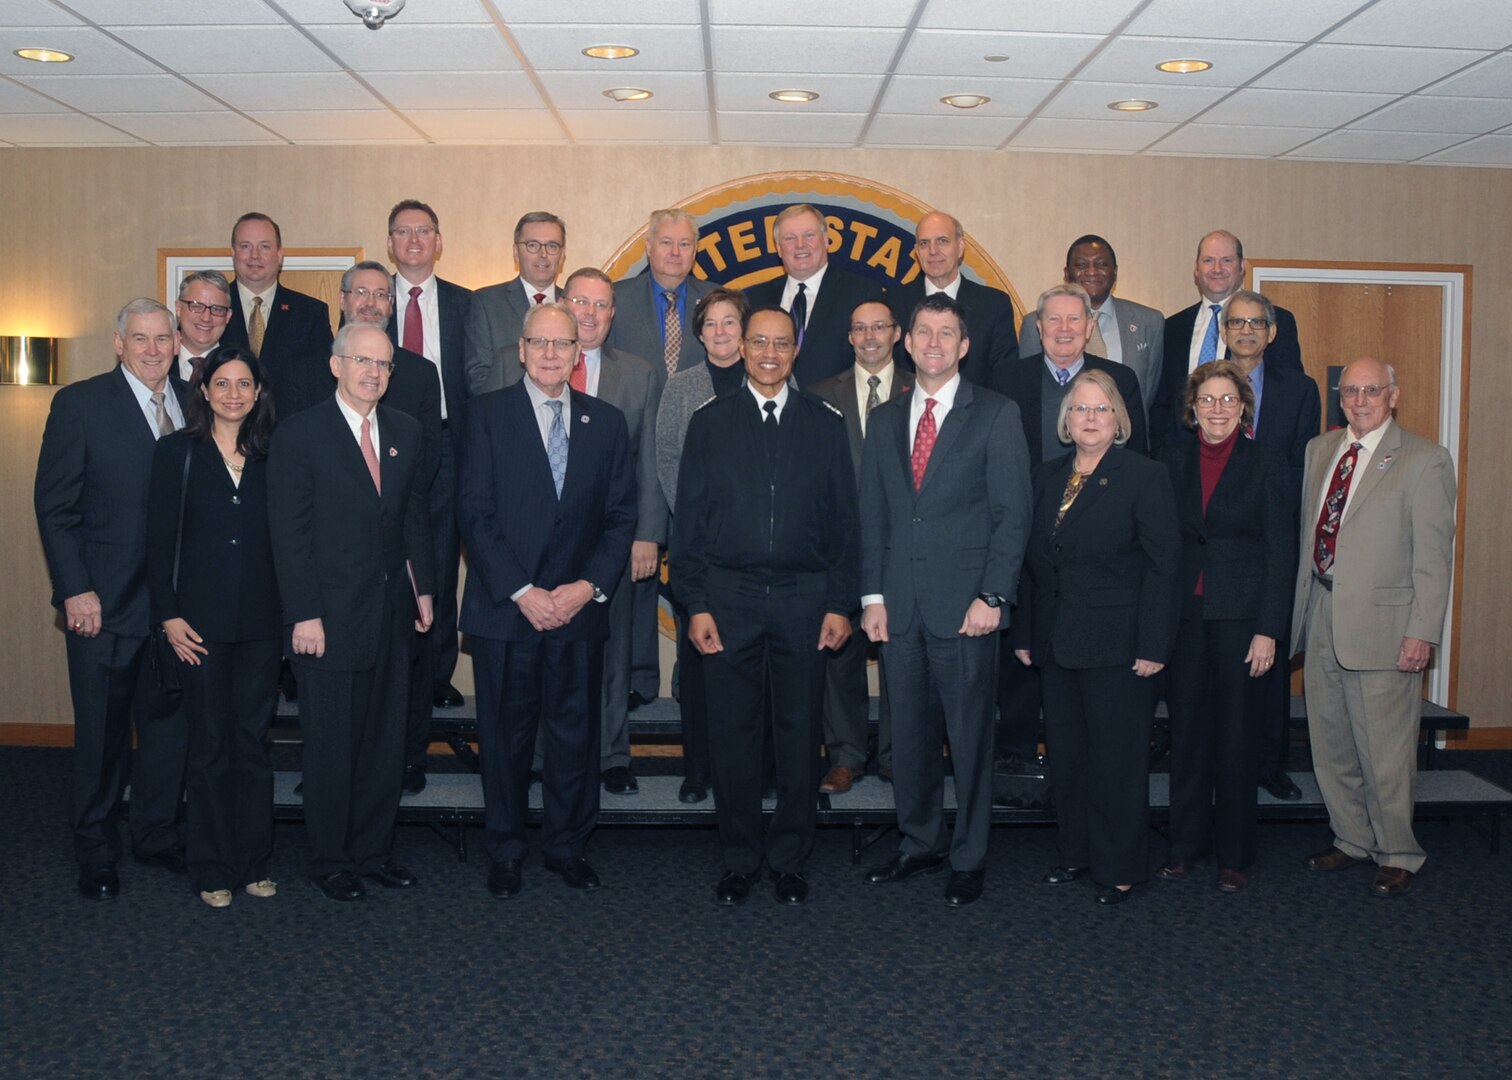 U.S. Navy Adm. Cecil D. Haney (center), U.S. Strategic Command (USSTRATCOM) commander, poses for a photo with senior leaders from the University of Nebraska during their visit to USSTRATCOM Headquarters, Offutt Air Force Base, Neb., Jan. 12, 2016. Hosting the delegation supports USSTRATCOM's Deterrence and Assurance Academic Alliance, which was established in Oct. 2014 to stimulate new thinking and develop future generations of deterrence practitioners. Since then, 20 local and national universities have joined the alliance, including the University of Nebraska campuses. During their visit, the delegation received a USSTRATCOM mission brief from Haney, toured the Global Operations Center and held discussions with subject matter experts from the command. Hosting the engagement is part of USSTRATCOM's ongoing effort to build and maintain enduring relationships with partner organizations from the private sector, academia and allied nations. One of nine DoD unified combatant commands, USSTRATCOM has global strategic missions, assigned through the Unified Command Plan, which include strategic deterrence; space operations; cyberspace operations; joint electronic warfare; global strike; missile defense; intelligence, surveillance and reconnaissance; combating weapons of mass destruction; and analysis and targeting. (USSTRATCOM photo by Steve Cunningham)